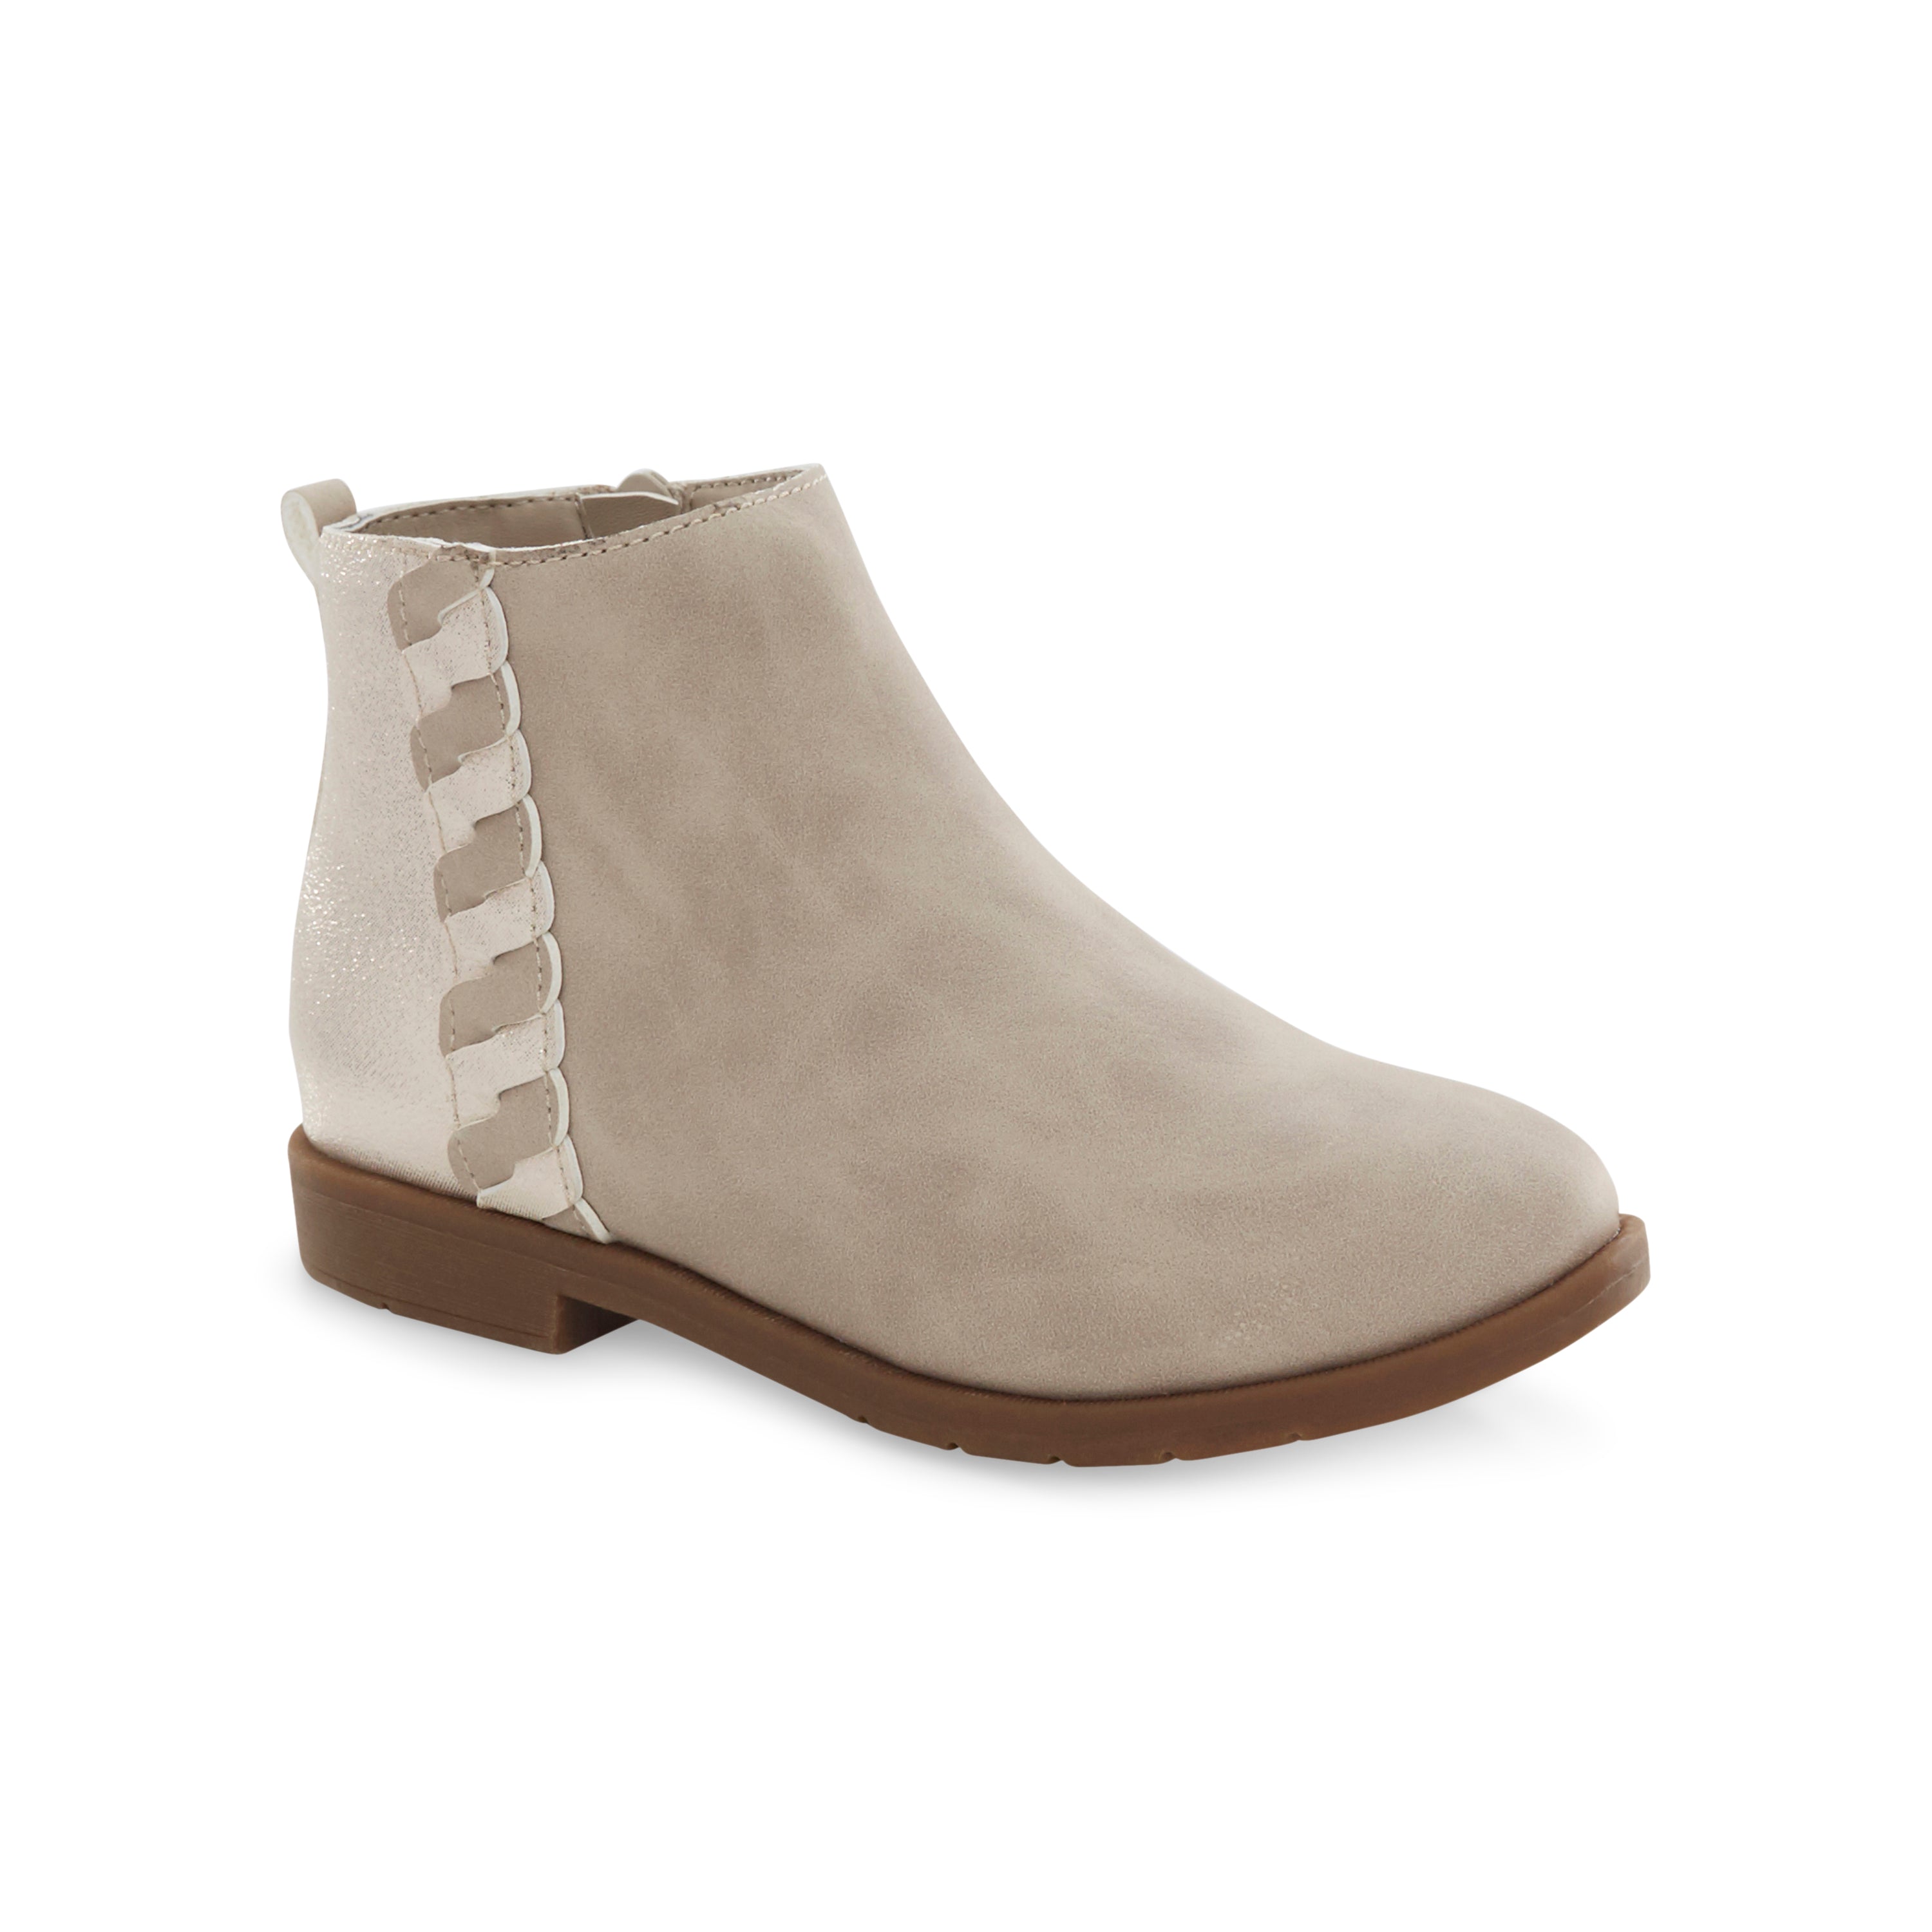 SR Carolyn Kid's Ankle Bootie - Taupe